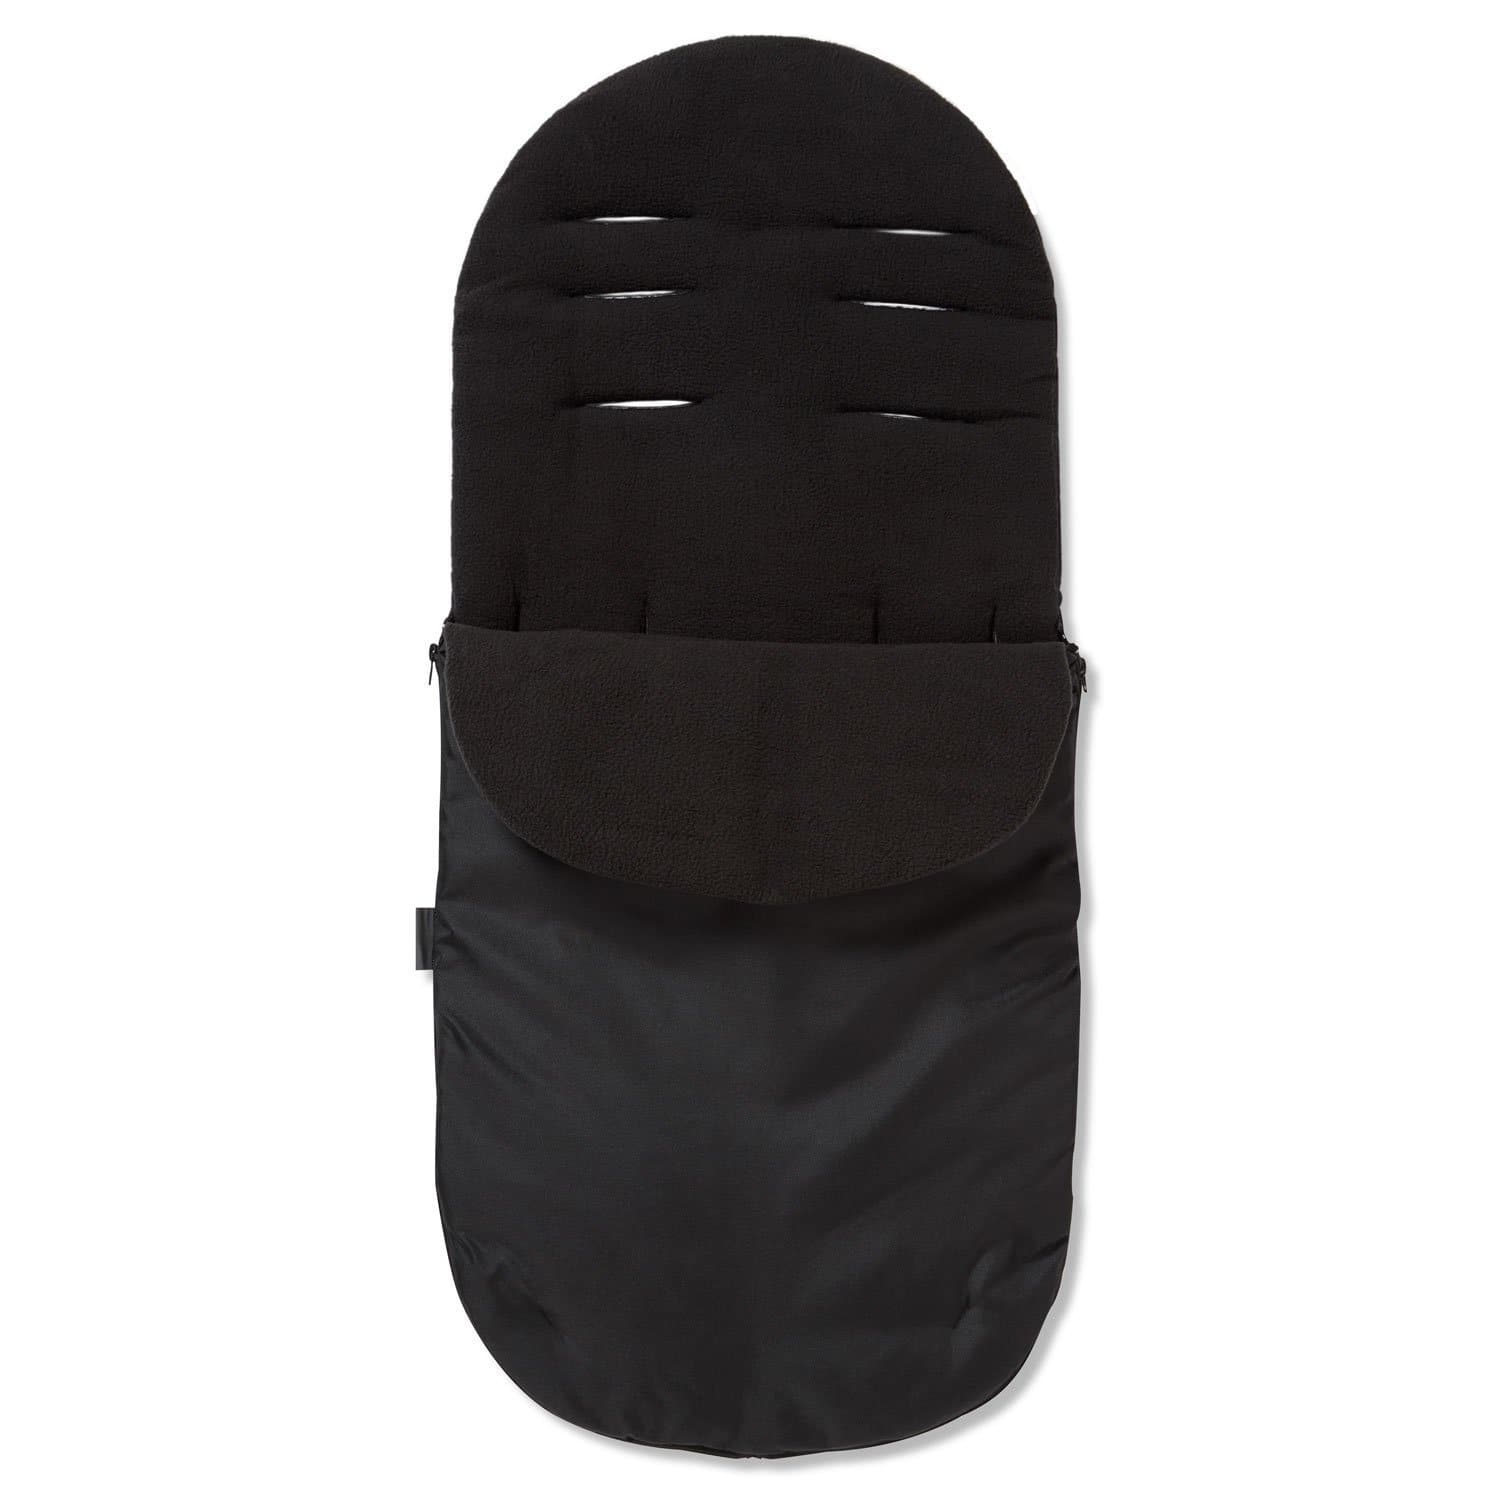 Footmuff / Cosy Toes Compatible with Casual - Black / Fits All Models | For Your Little One